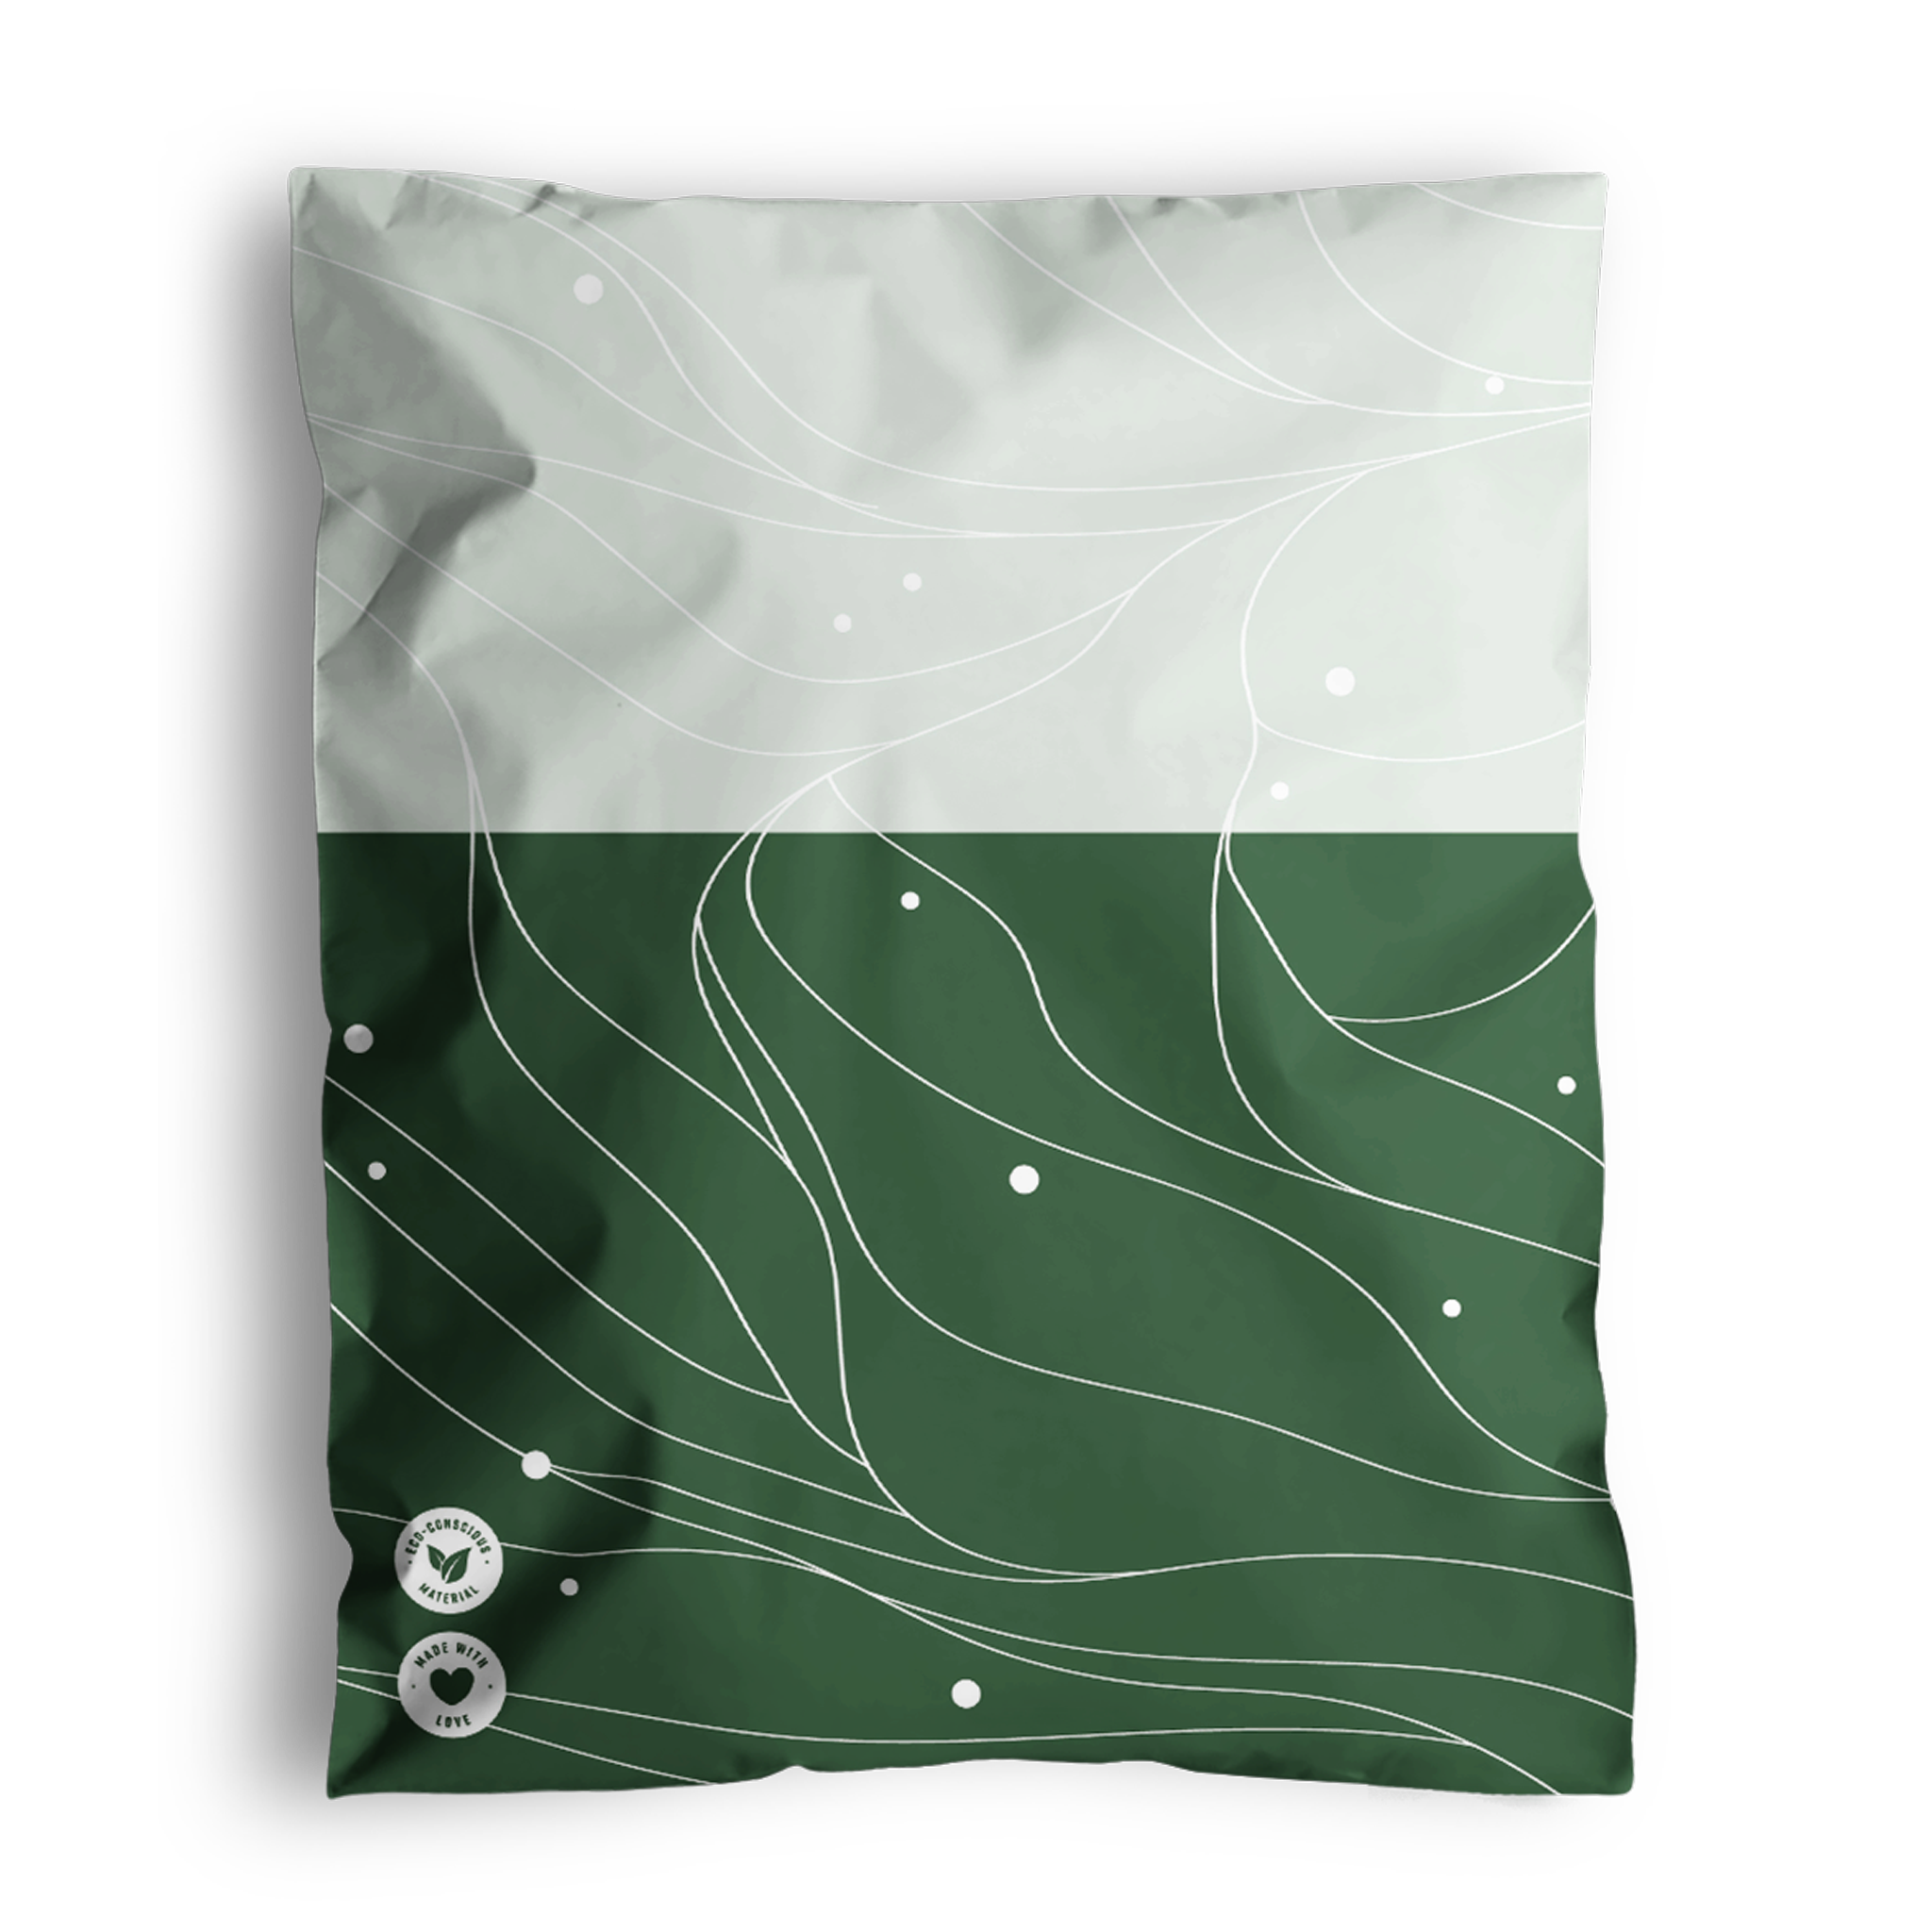 A green and white pillowcase featuring a wavy line design with a small green and white badge in the lower-left corner, reminiscent of versatile packaging solutions like Japanese Green Mailers 10" x 13" by impack.co.